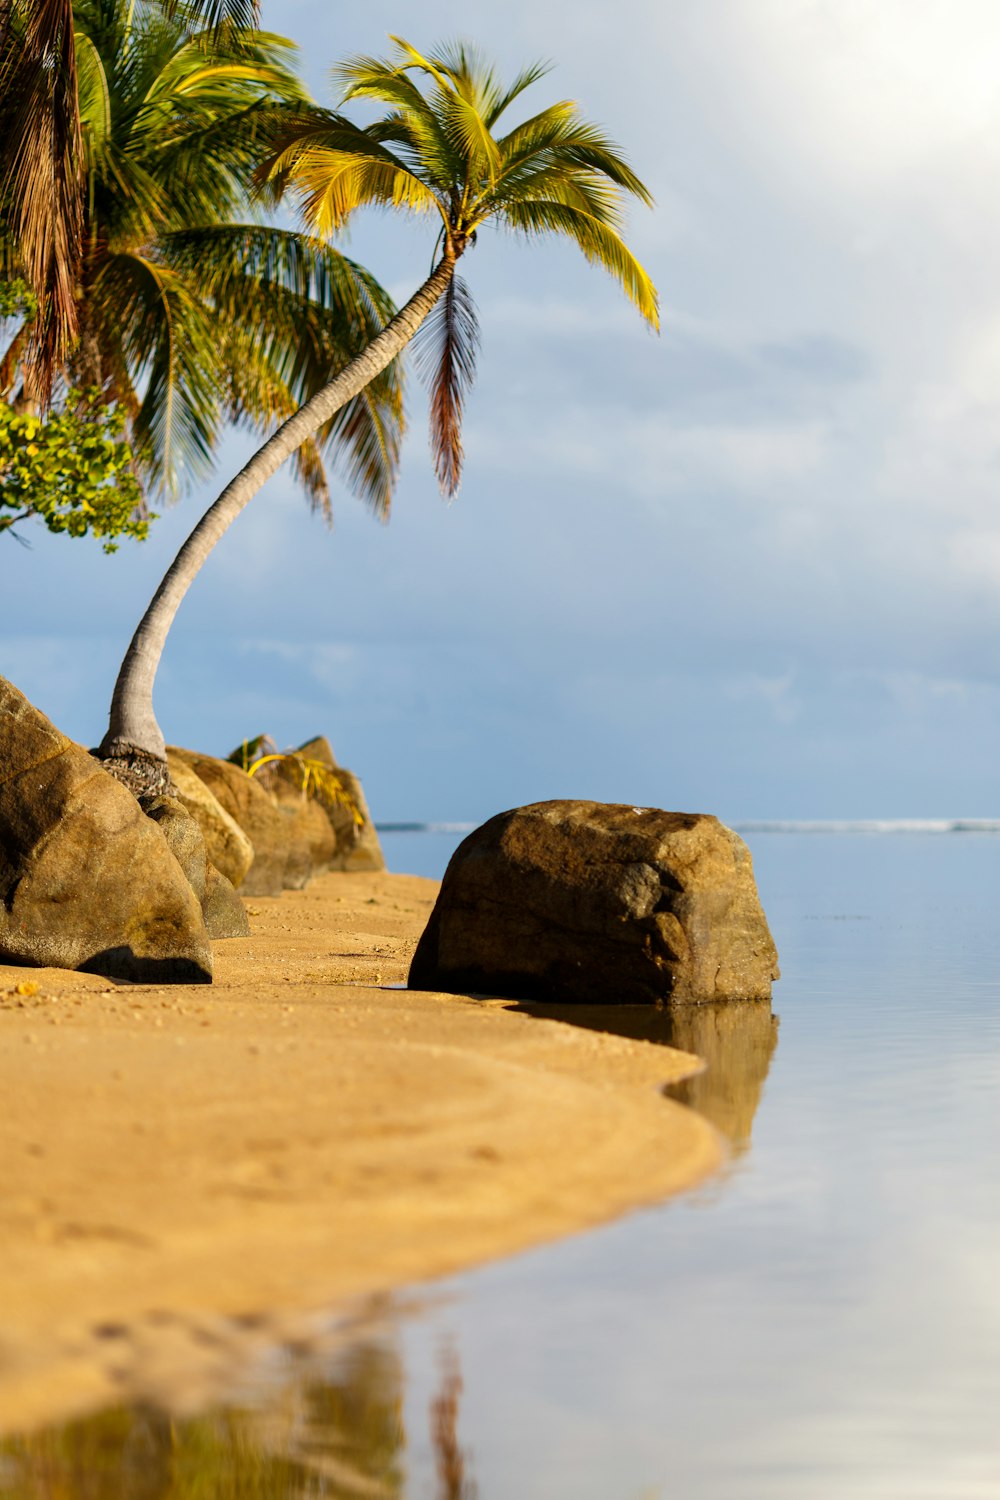 a palm tree on a beach with rocks and water